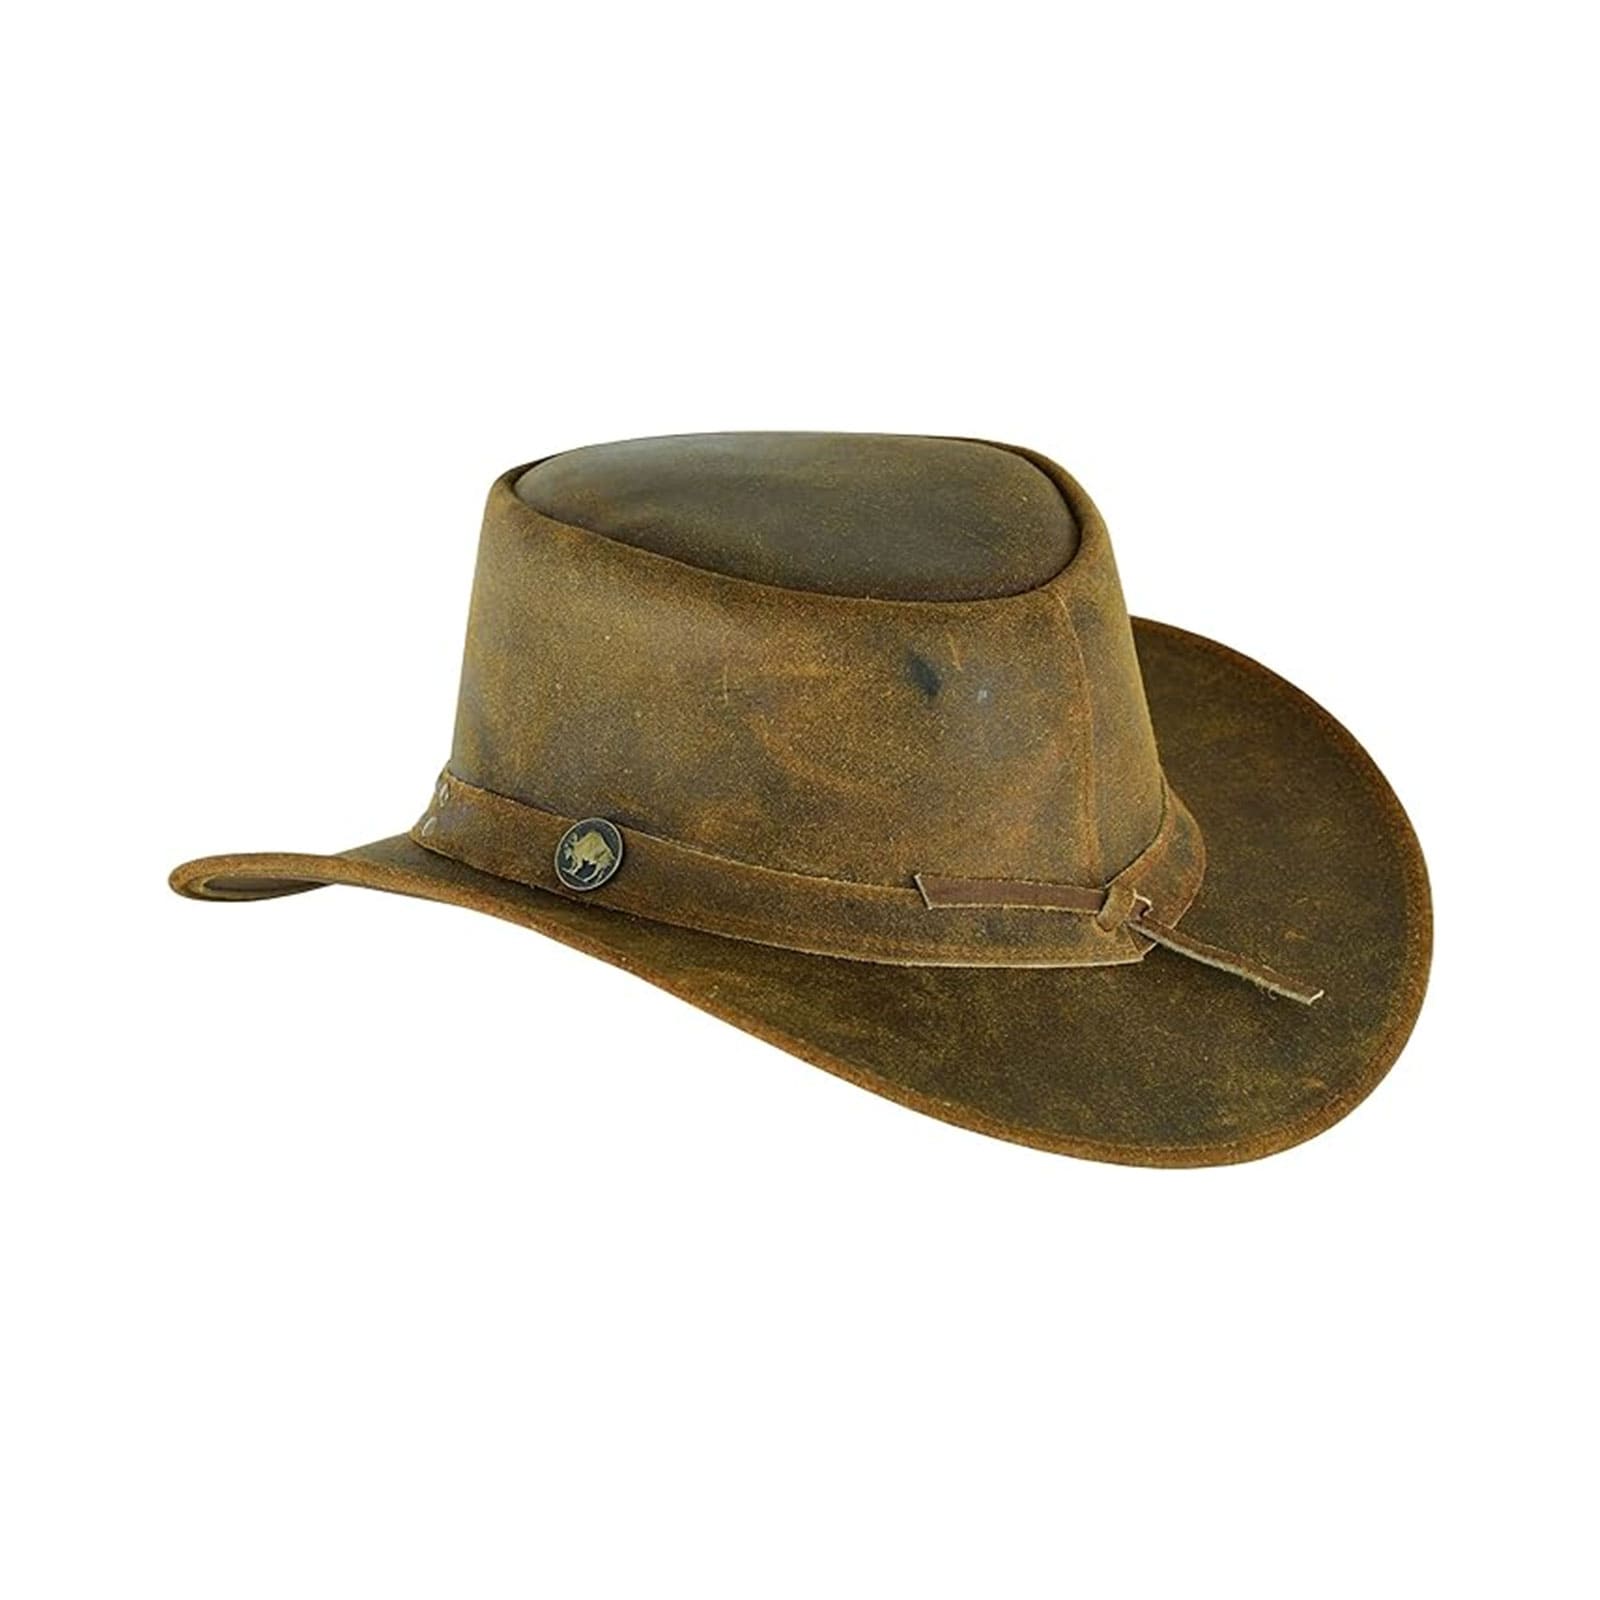     Genuine Men's Leather Hats made of cowhide - Leatherick US